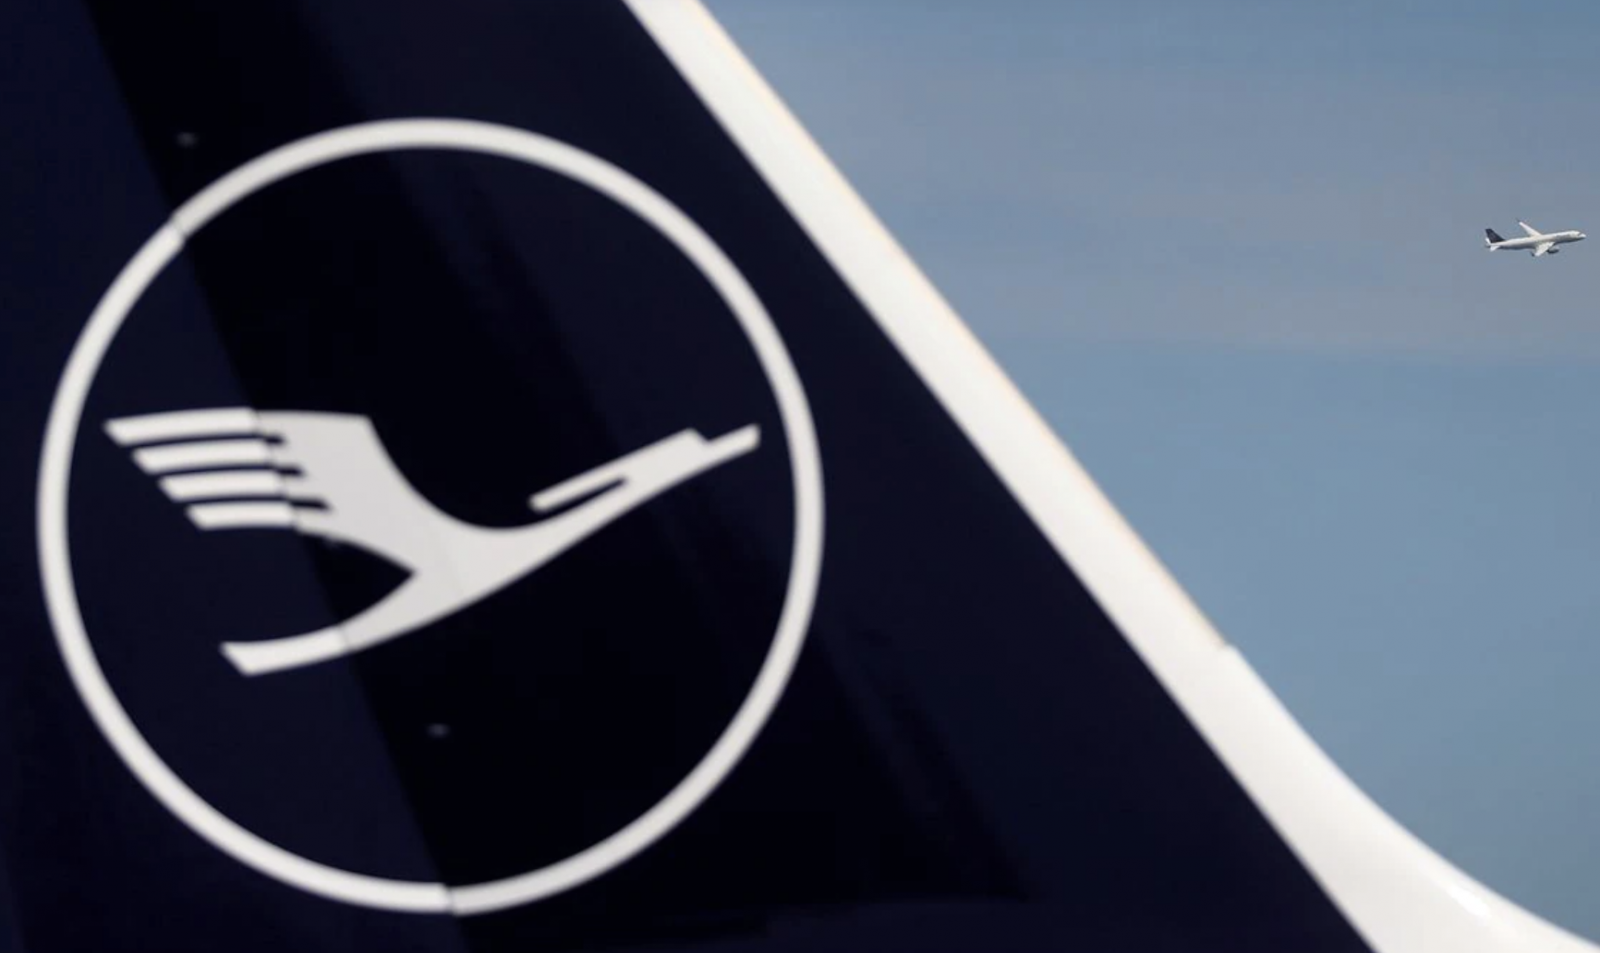 Lufthansa trims flight capacity outlook on slower recovery